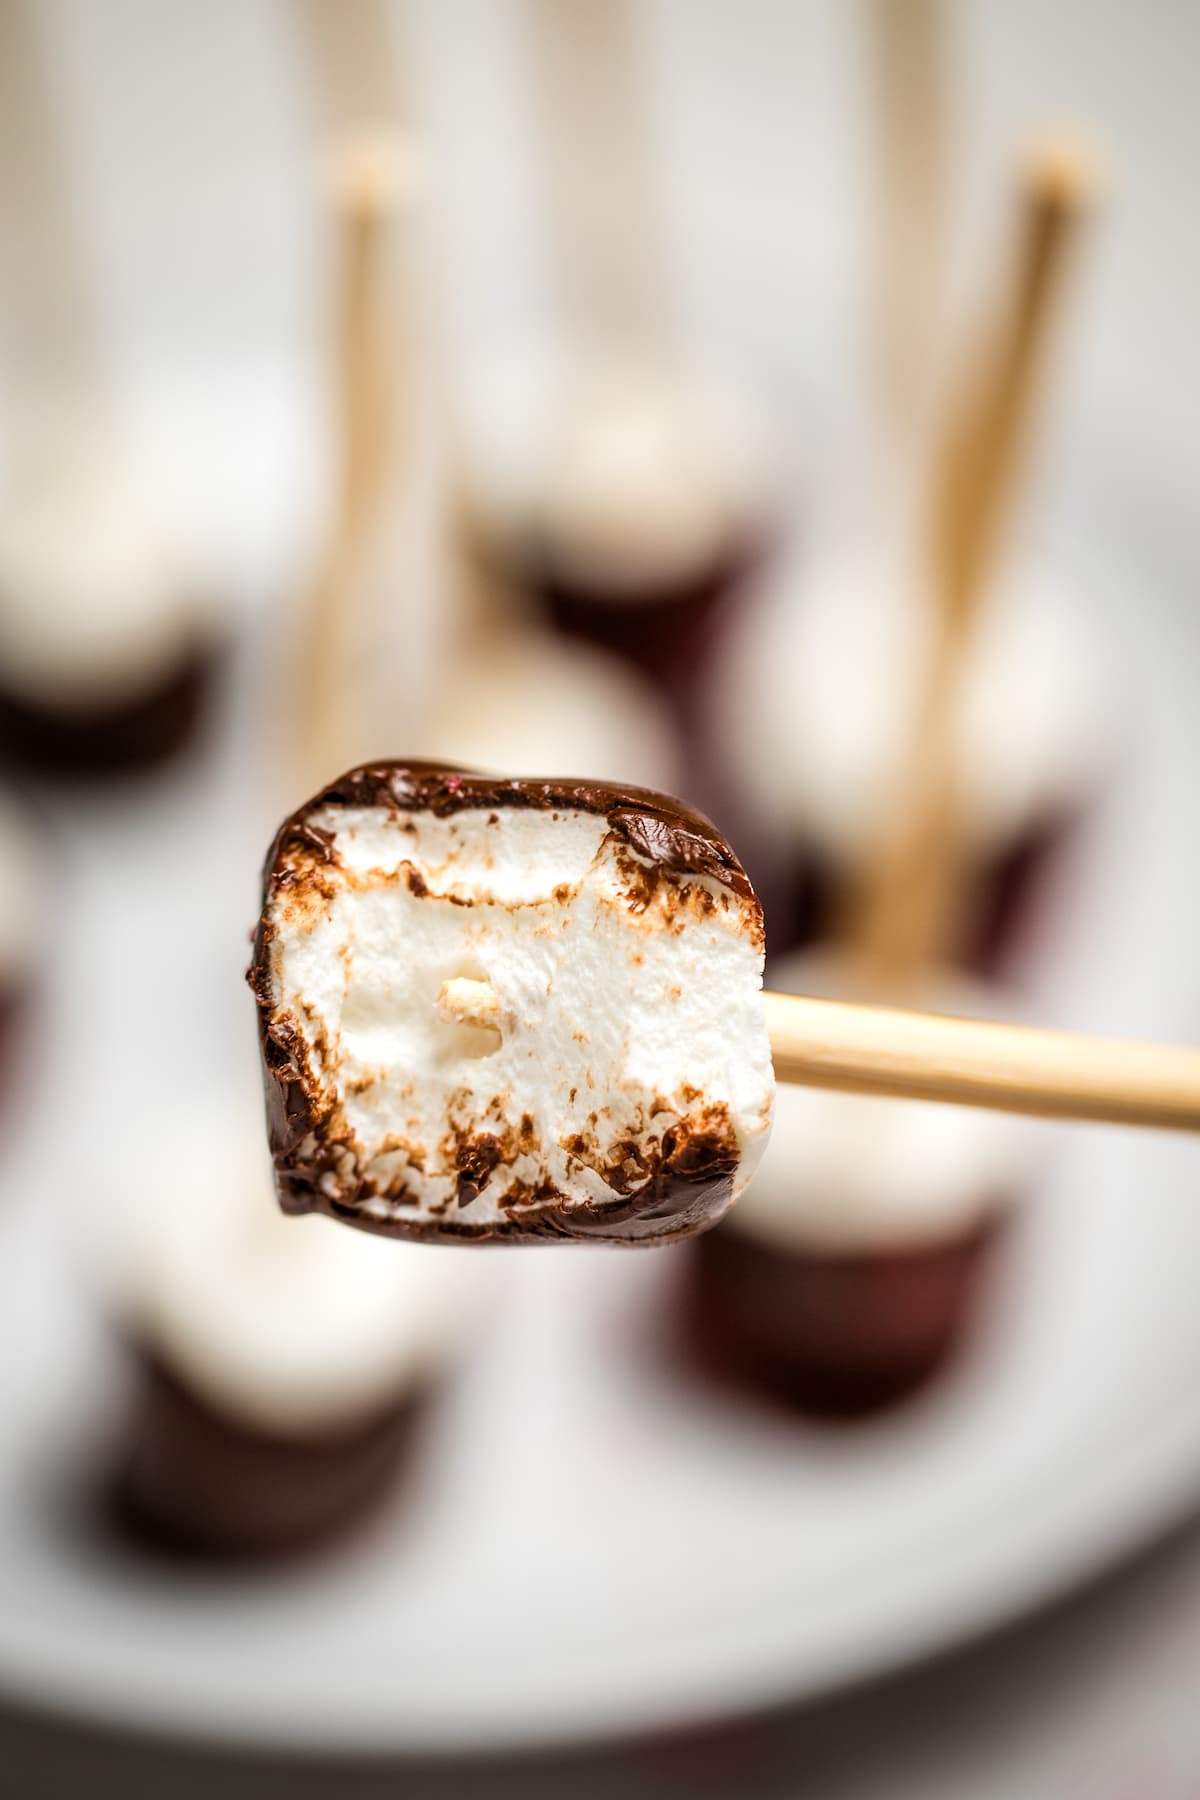 A chocolate dipped marshmallow on a stick with a bite taken out of it, with a plate of more chocolate marshmallows in the background.